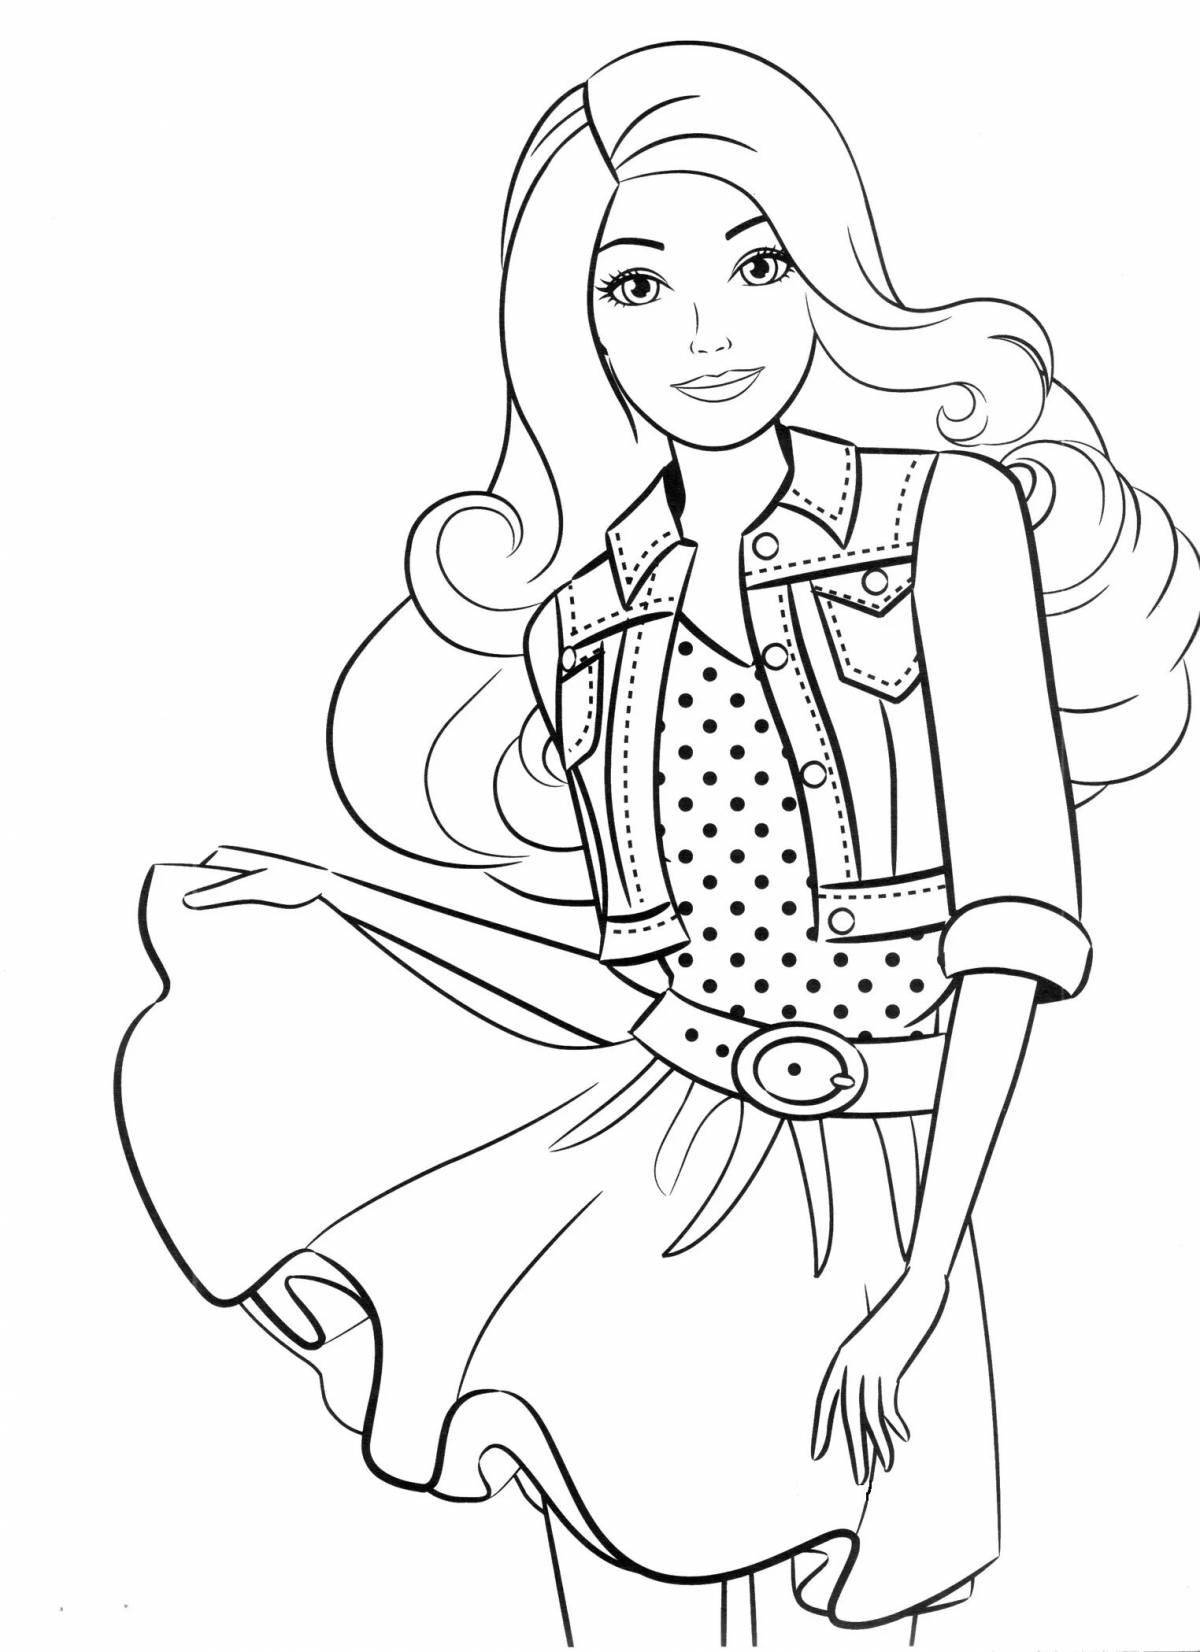 Adorable trendy coloring book for girls